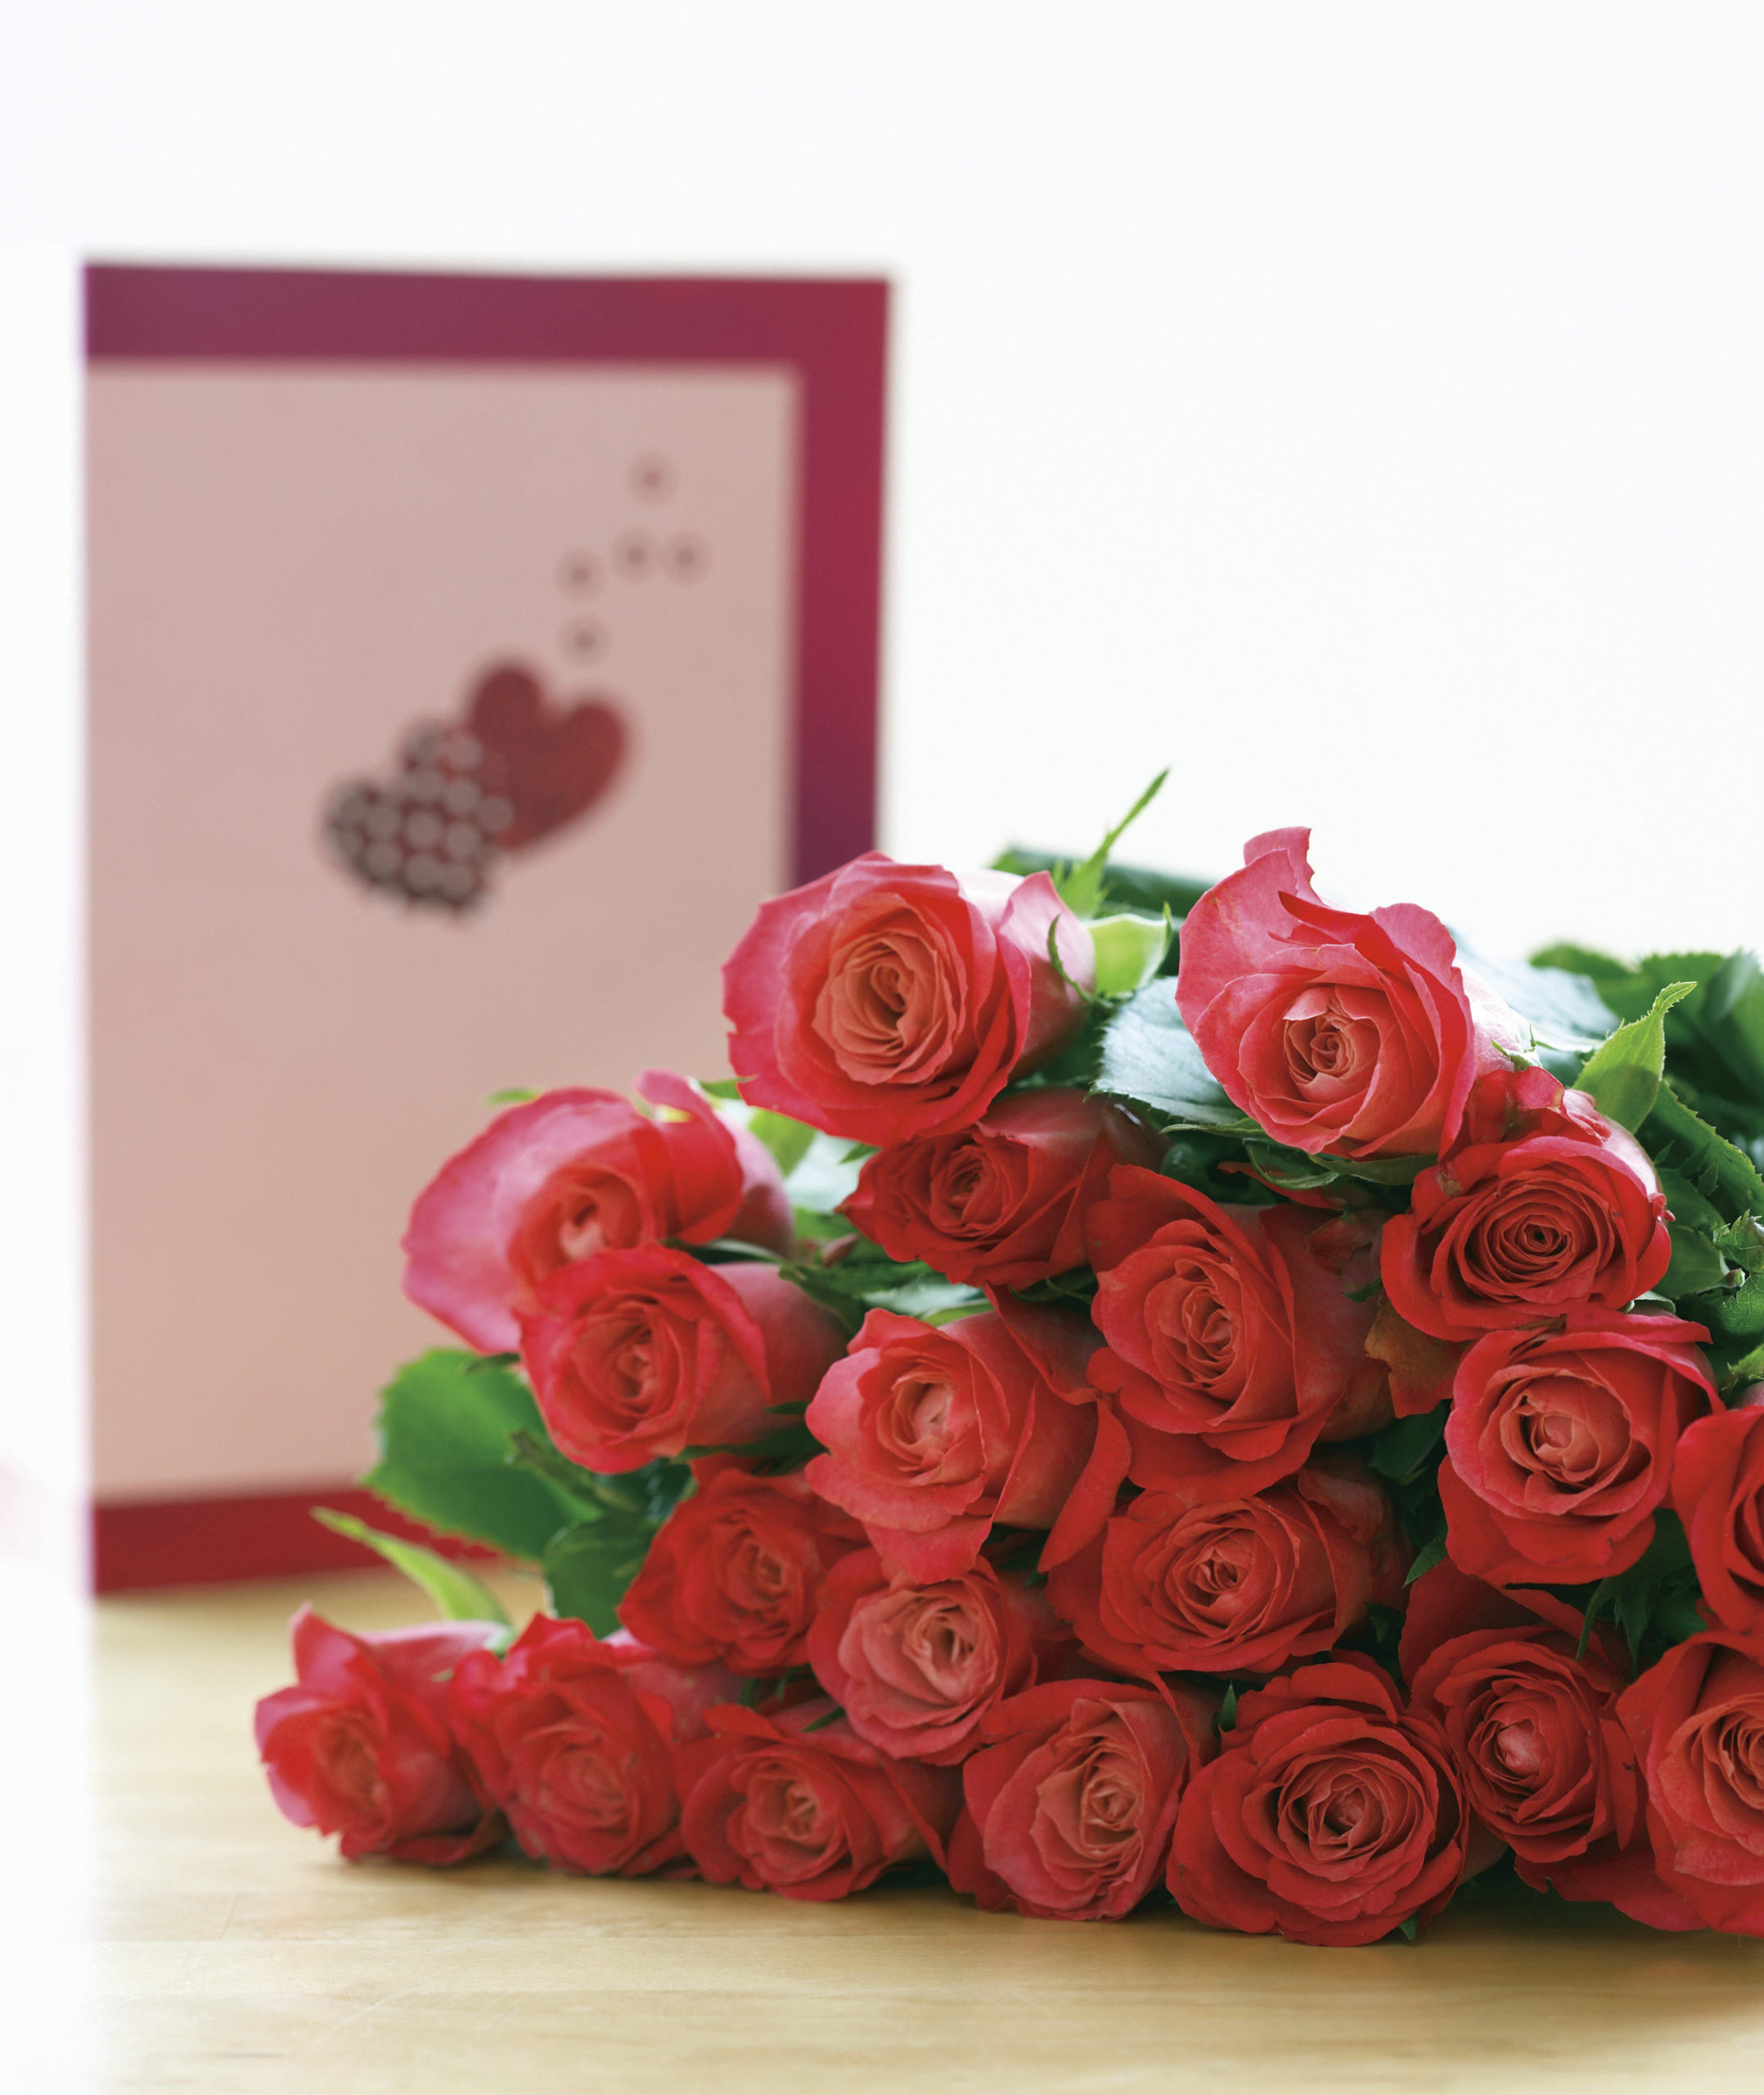 Amazon And Whole Foods Has Valentine's Roses For $19.99 | 99.7 DJX